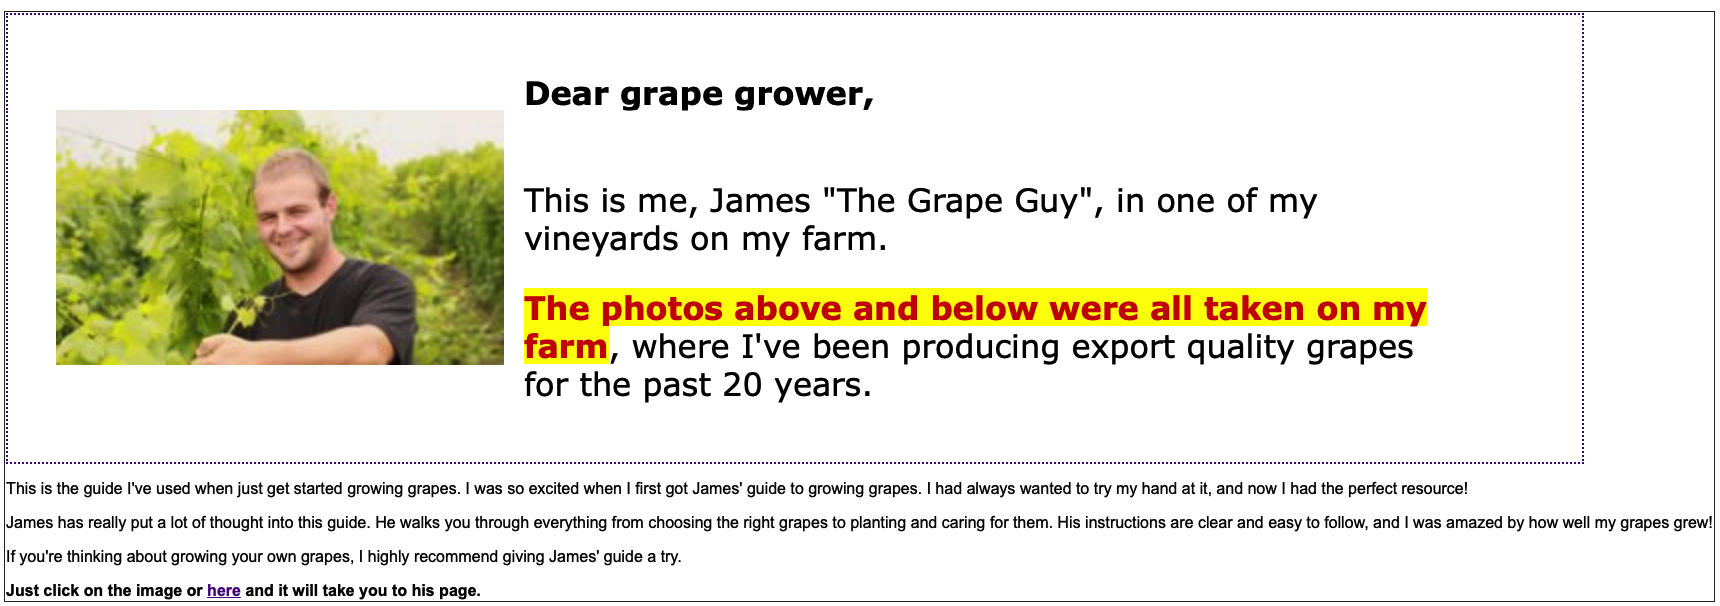 grapes growing by james